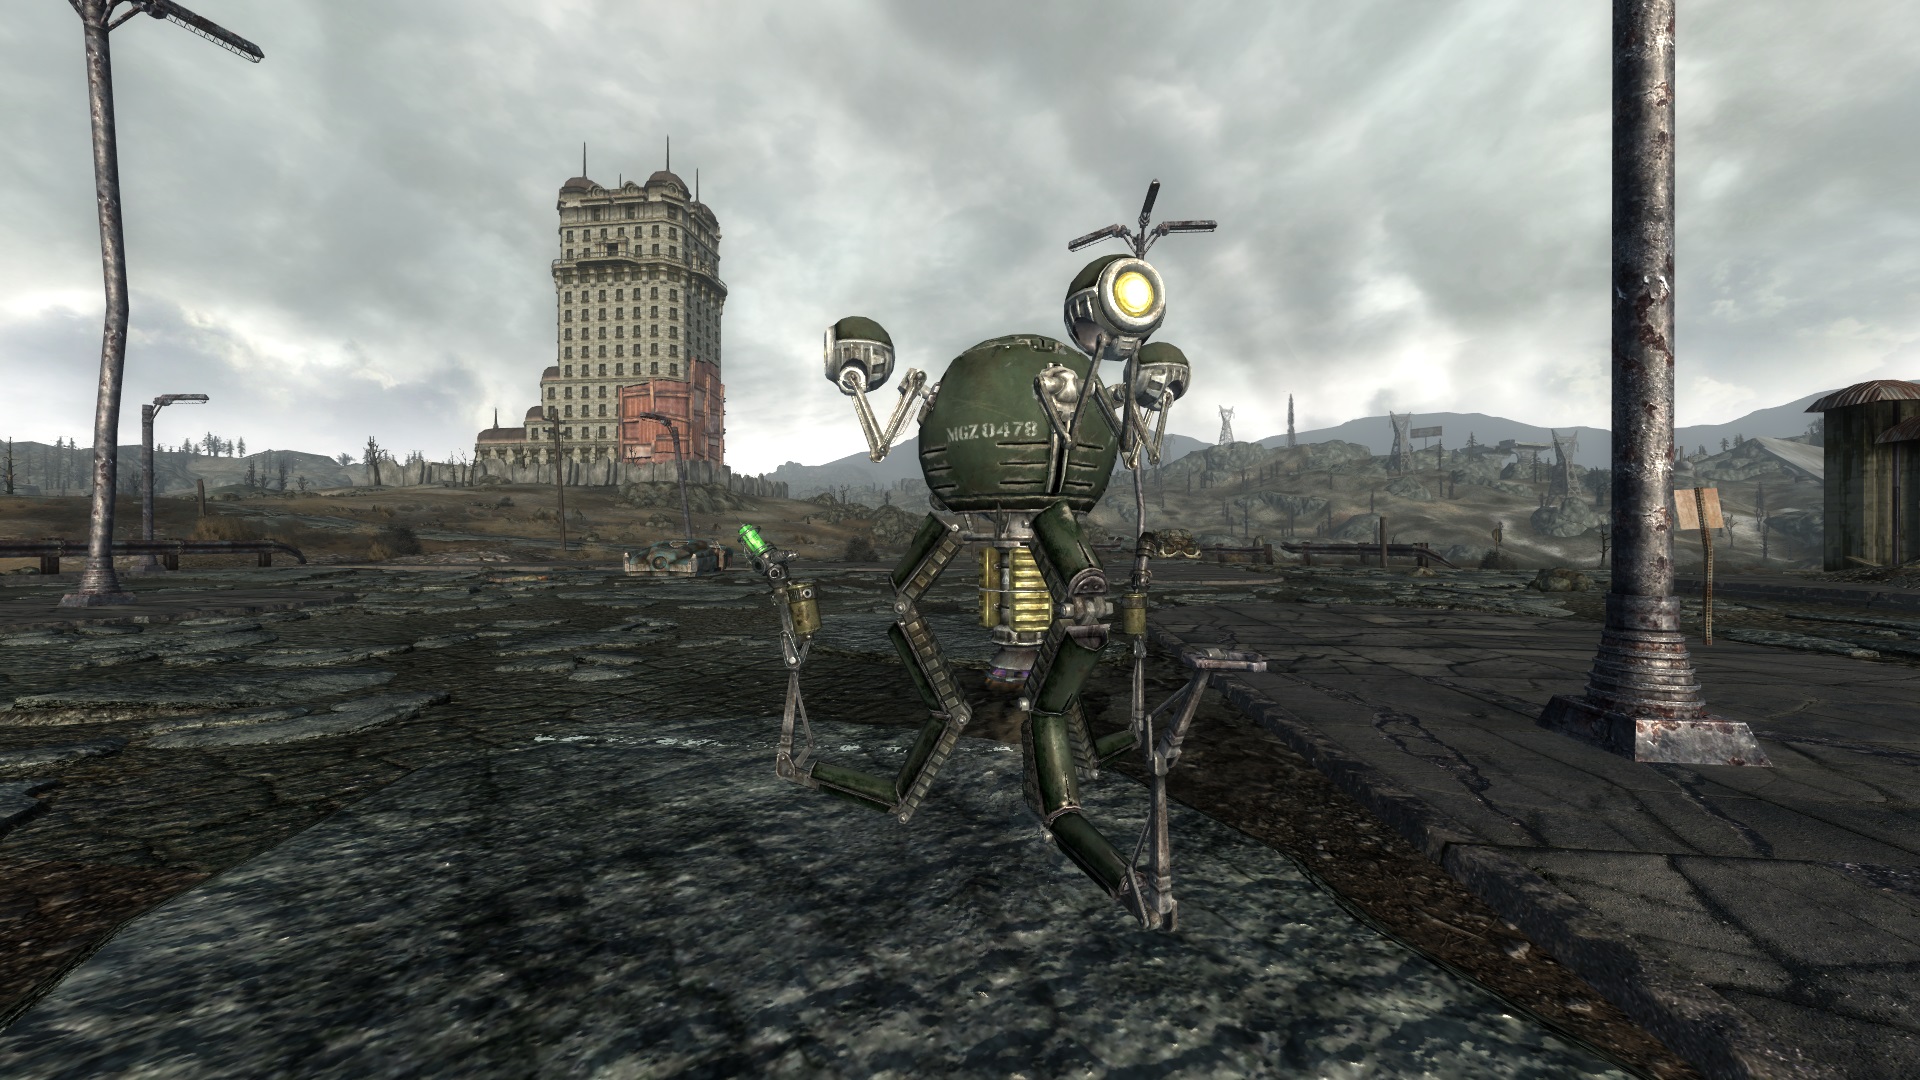 Fallout 3: Every Permanent Companion, Ranked